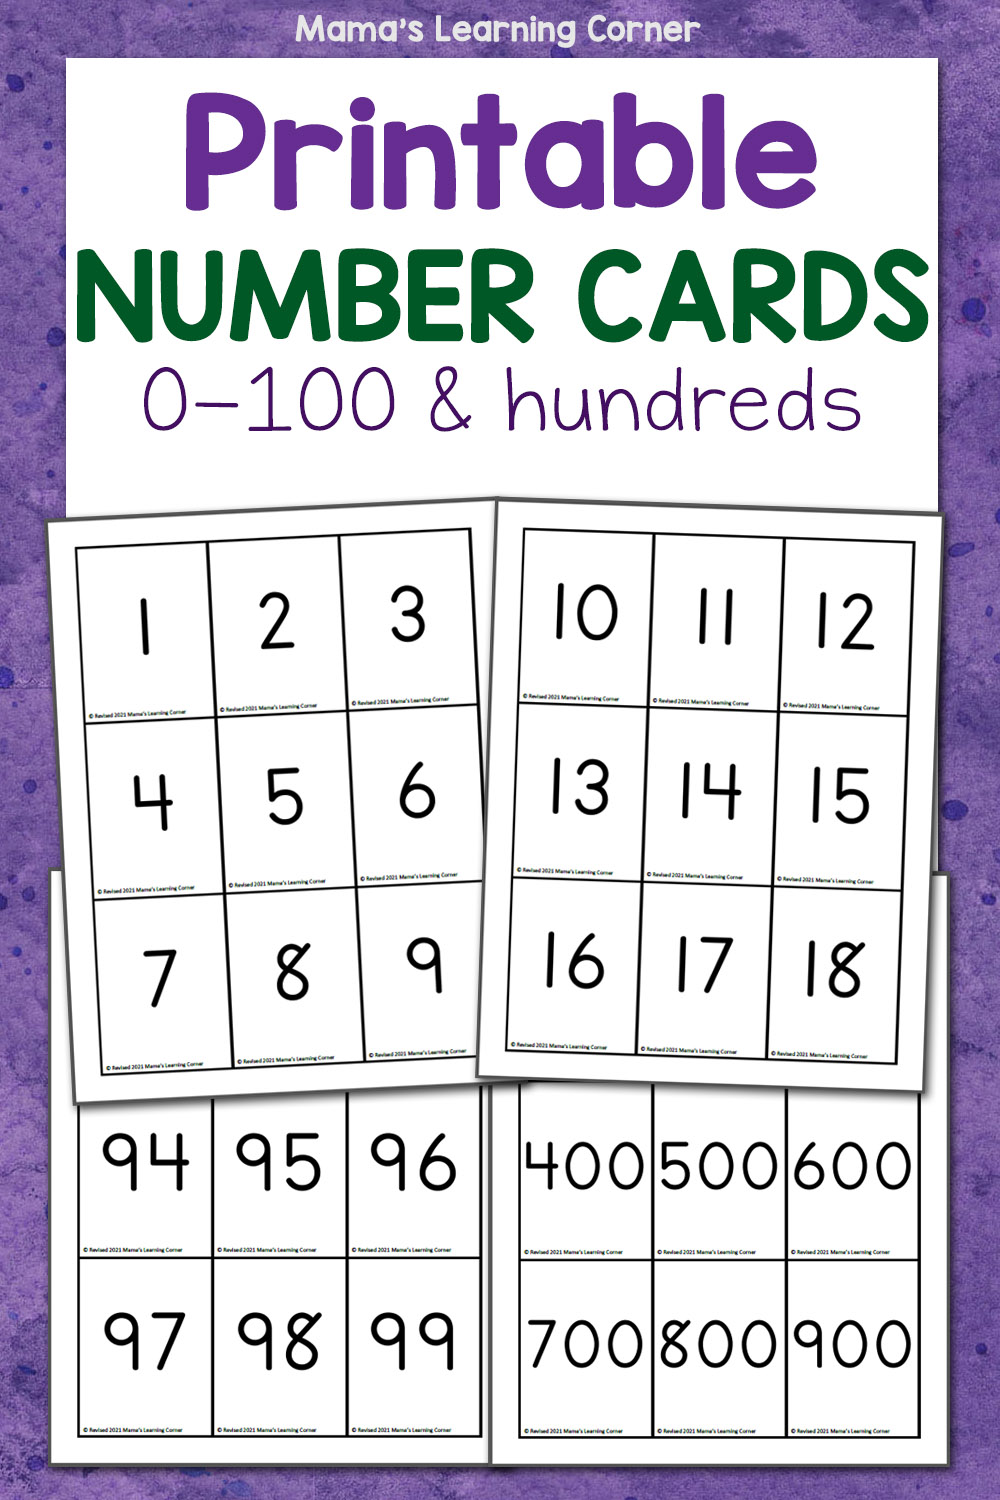 free-printable-number-cards-1-1000-printable-templates